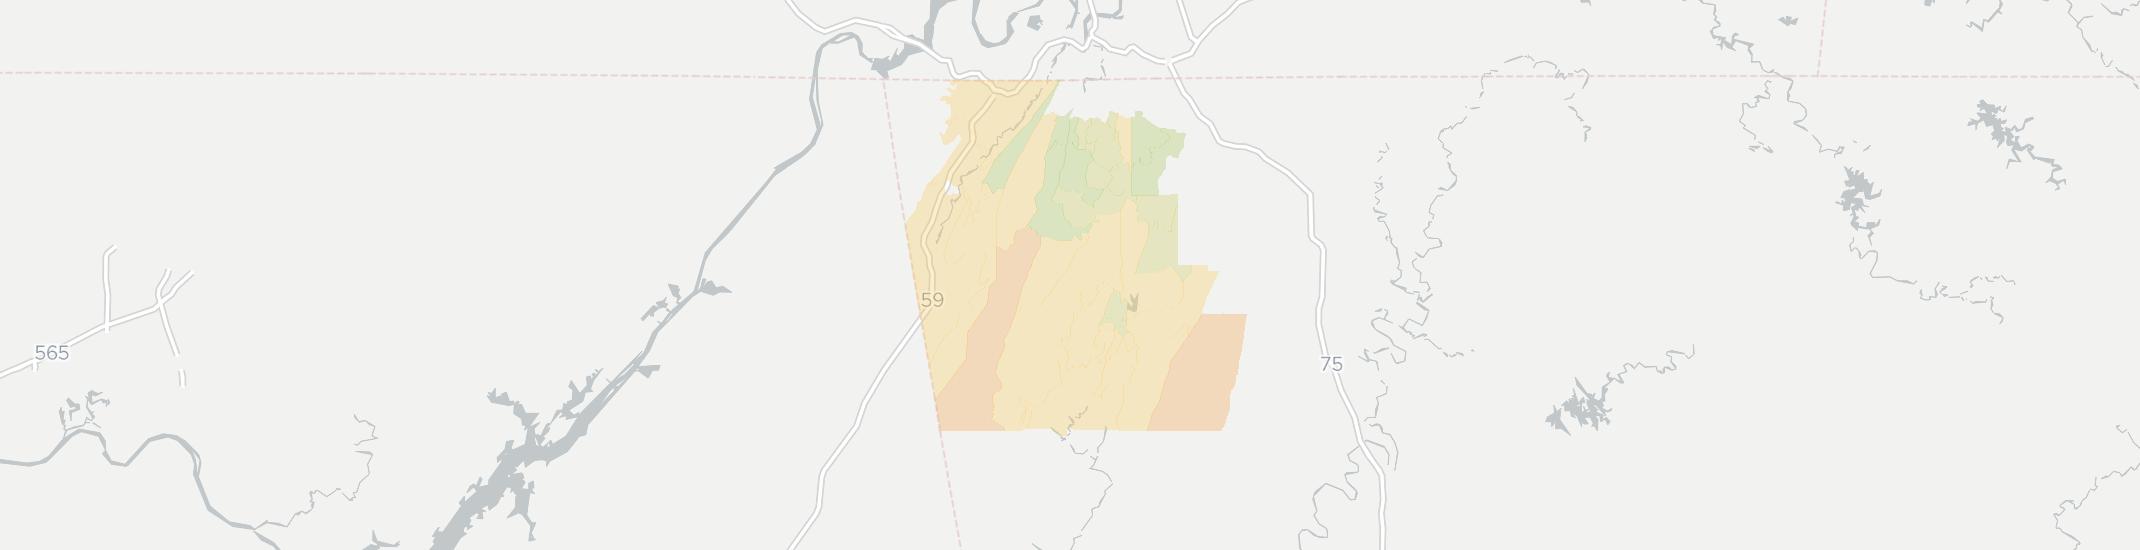 Chickamauga Internet Competition Map. Click for interactive map